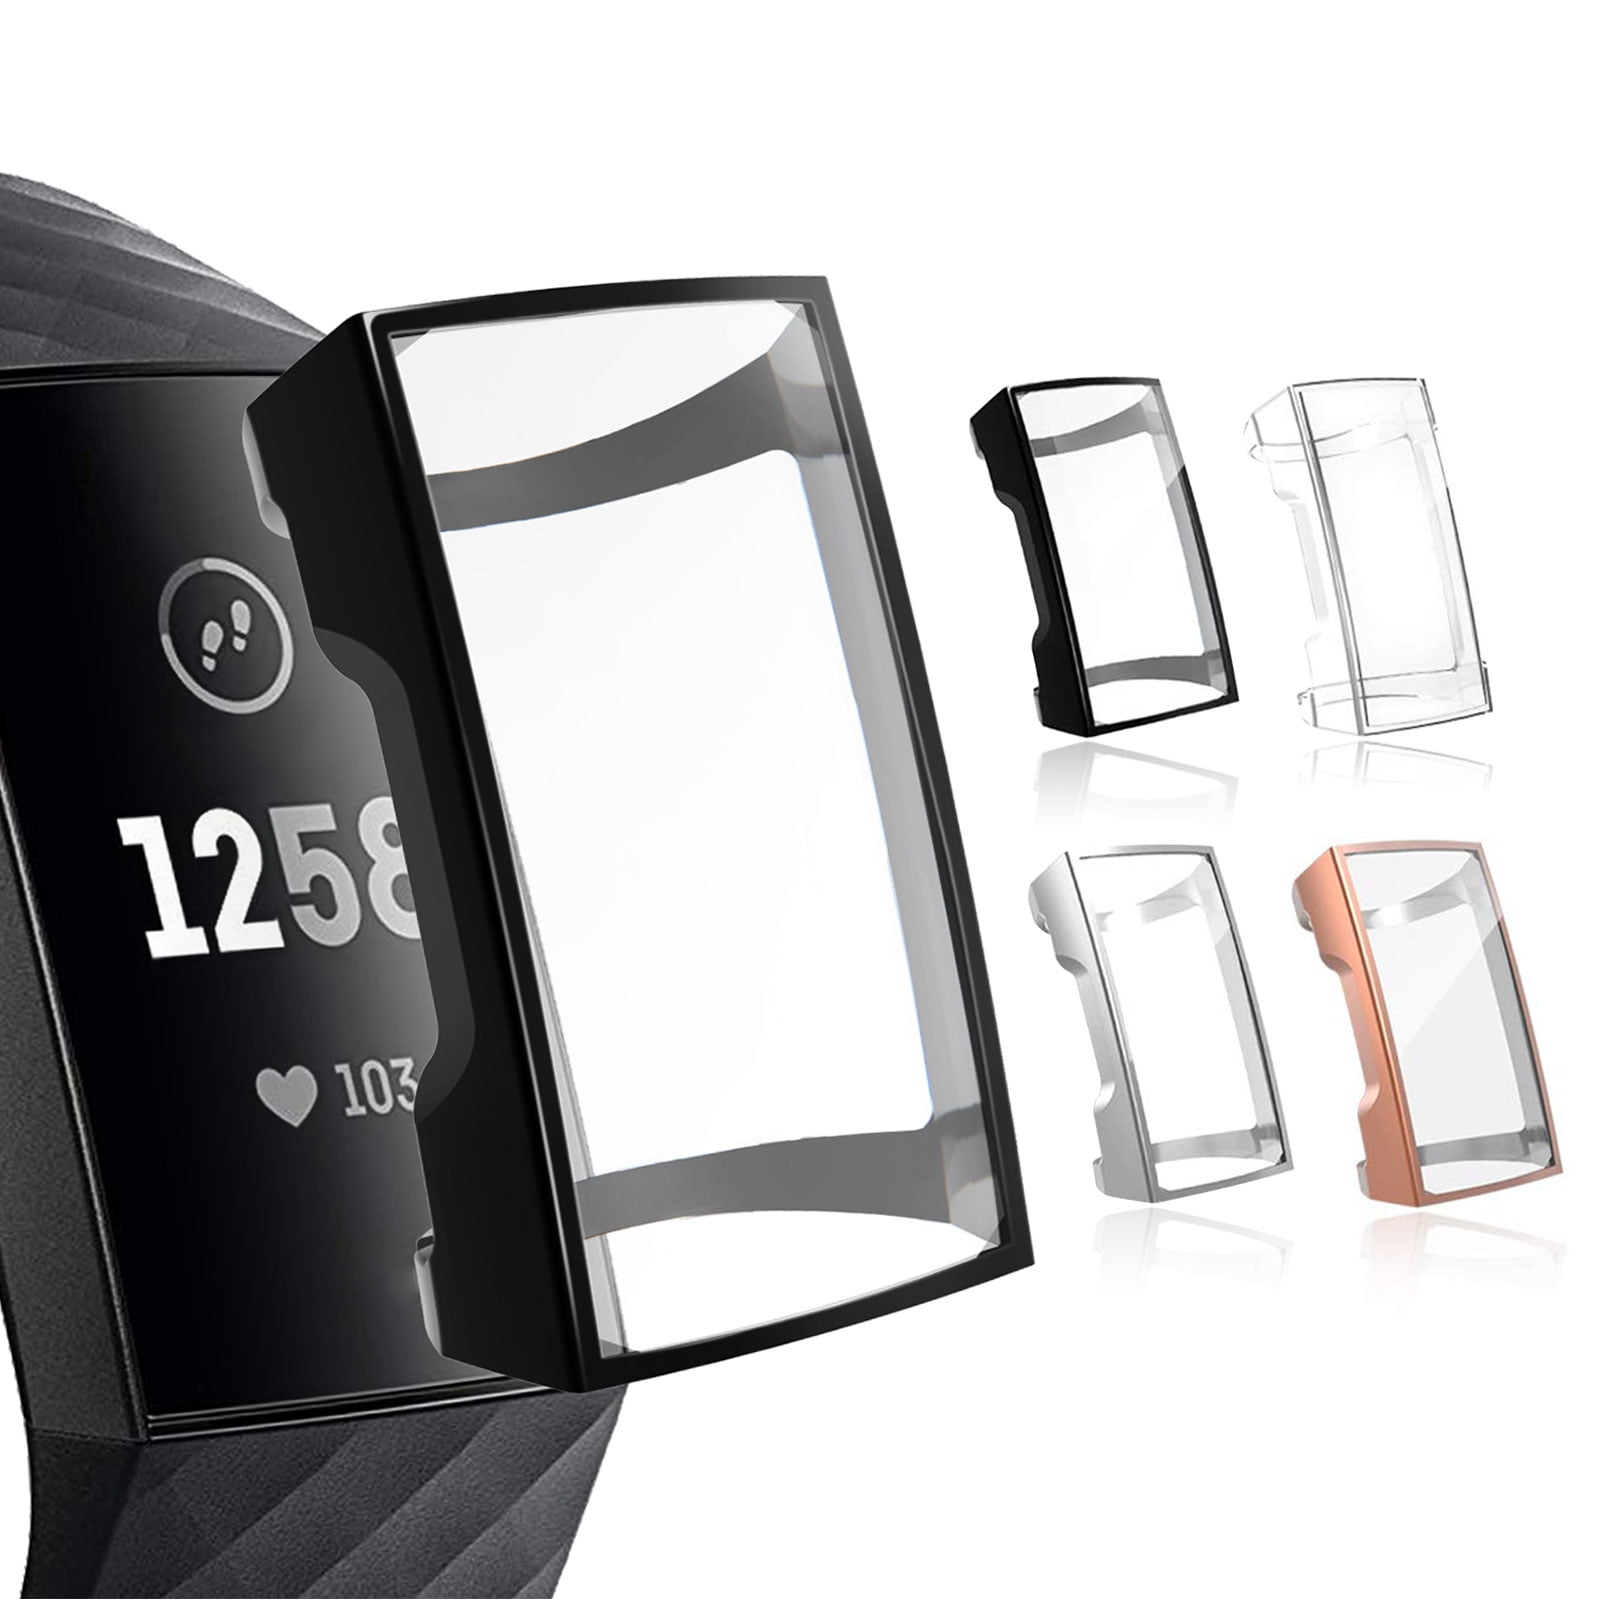 Compatible with Fitbit Charge 3 Screen 